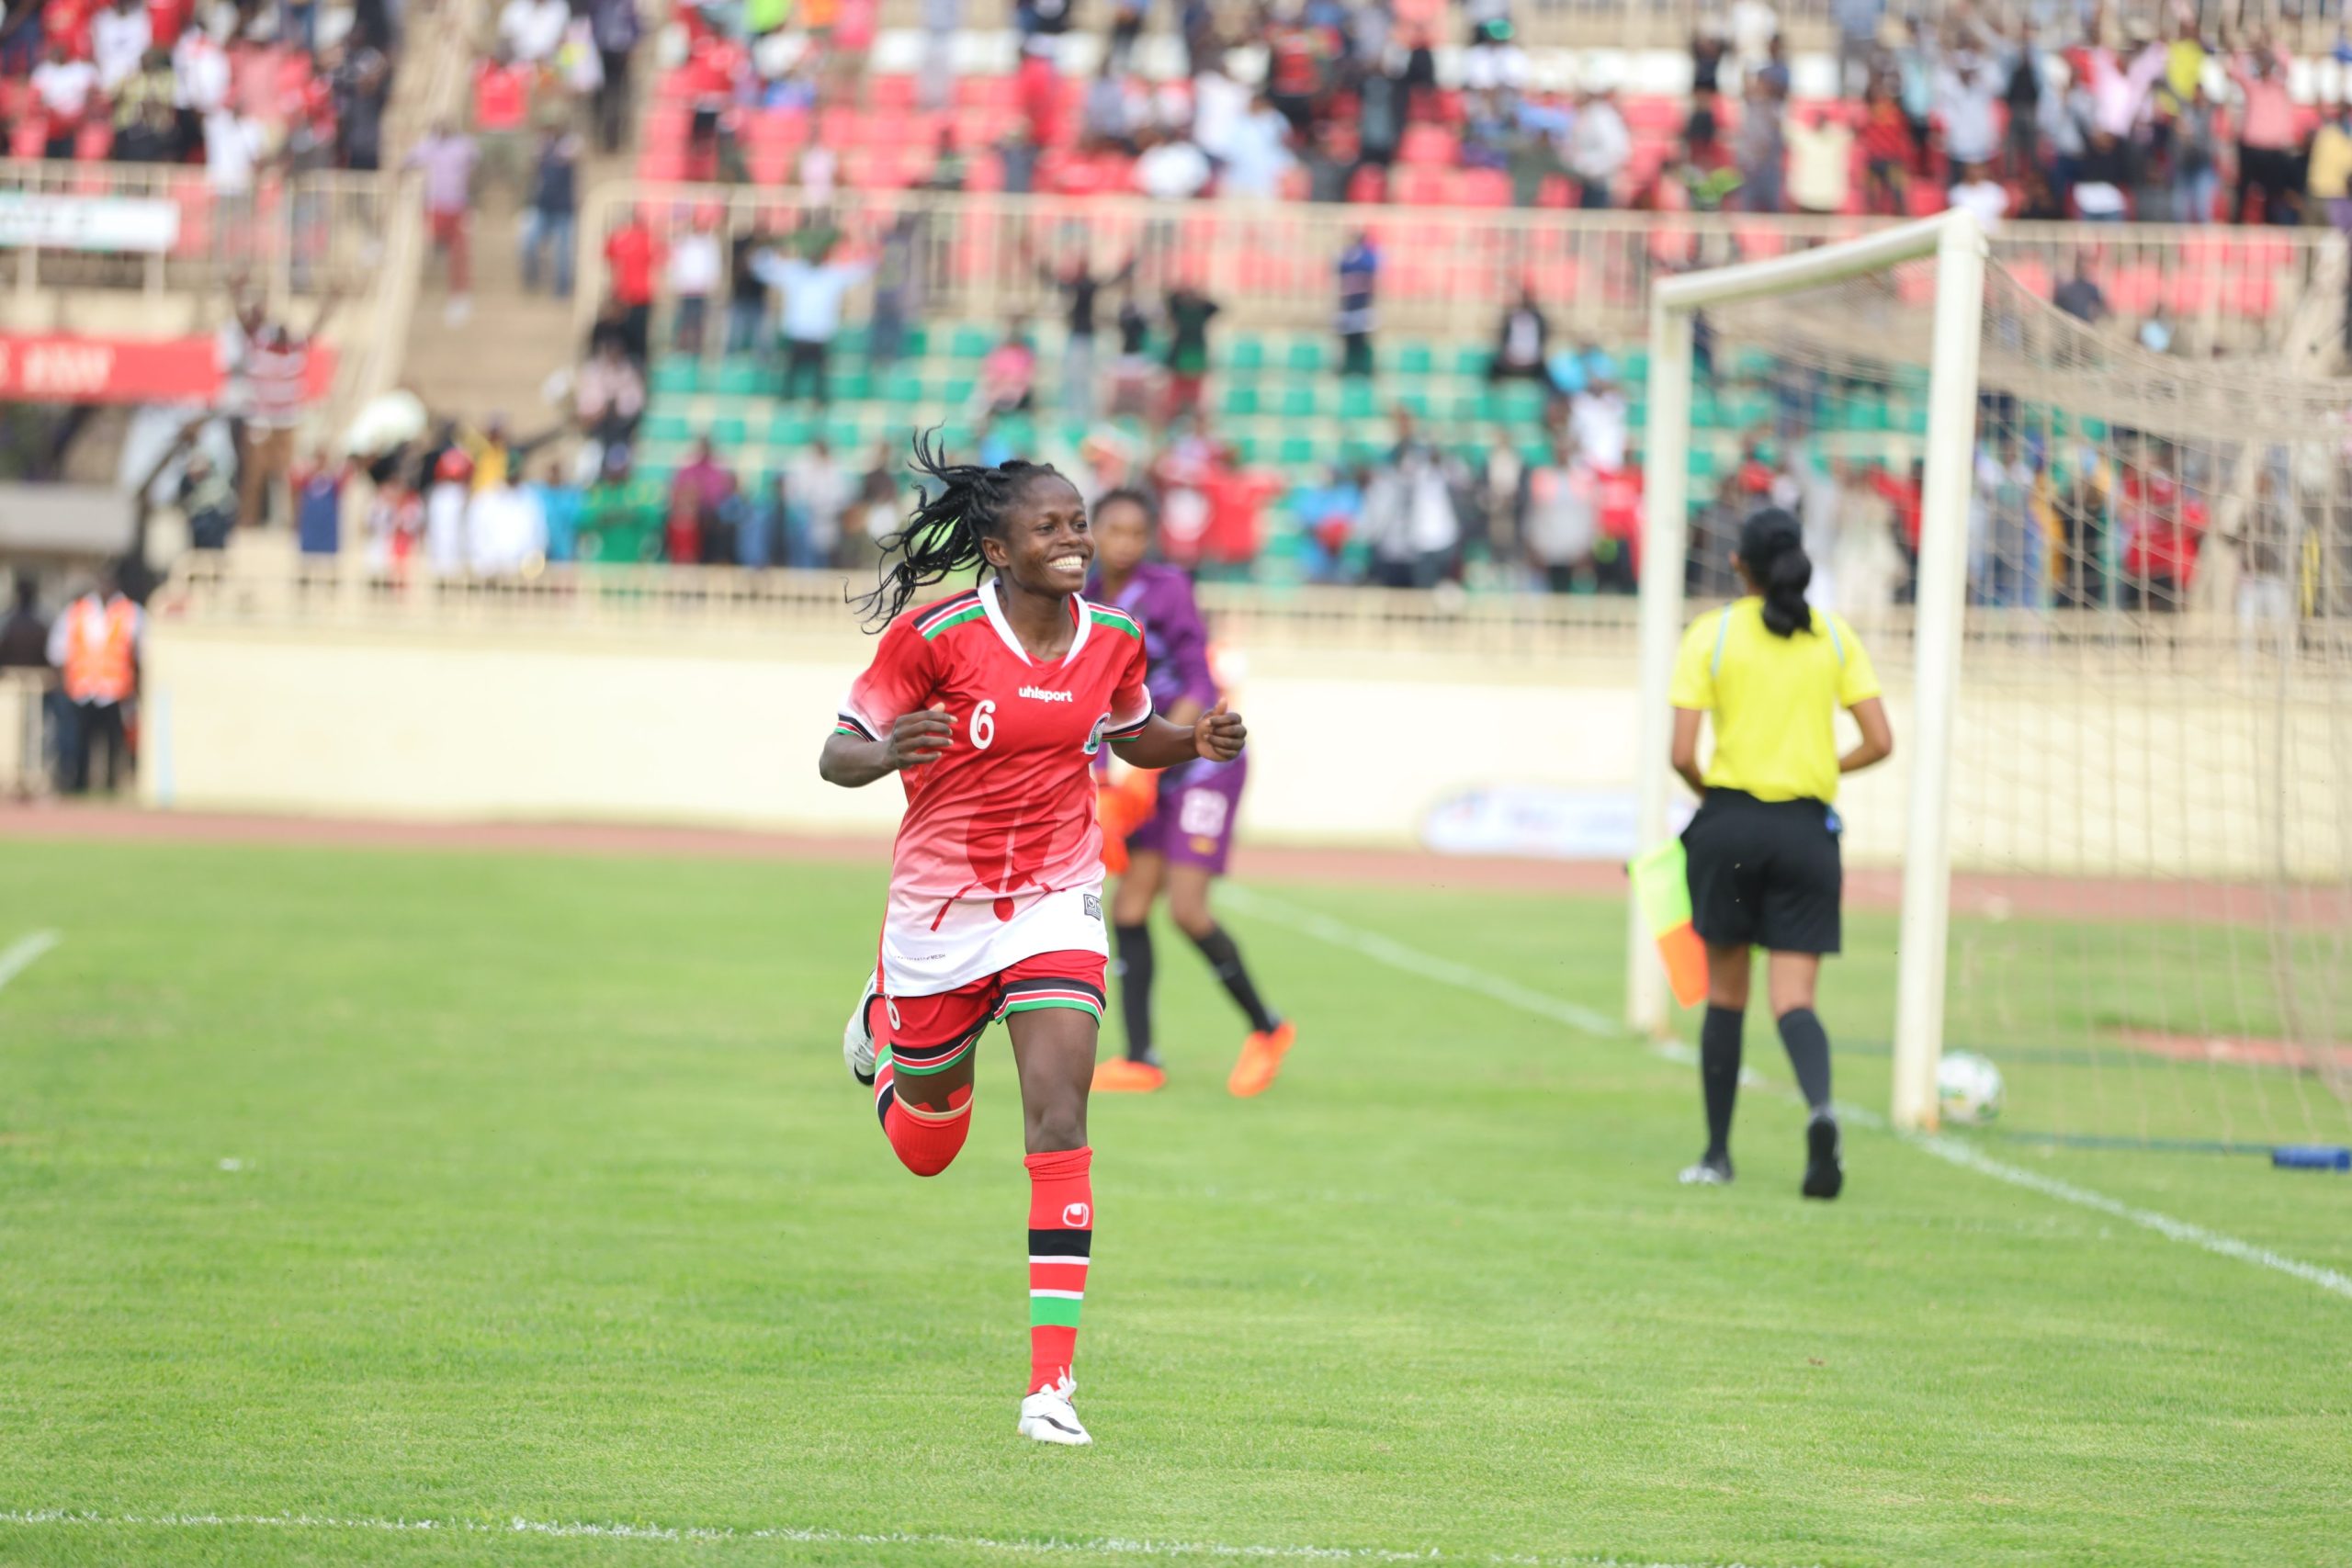 The Starlets defeated Cameroon, advancing to the next stage of the WAFCON qualifiers.